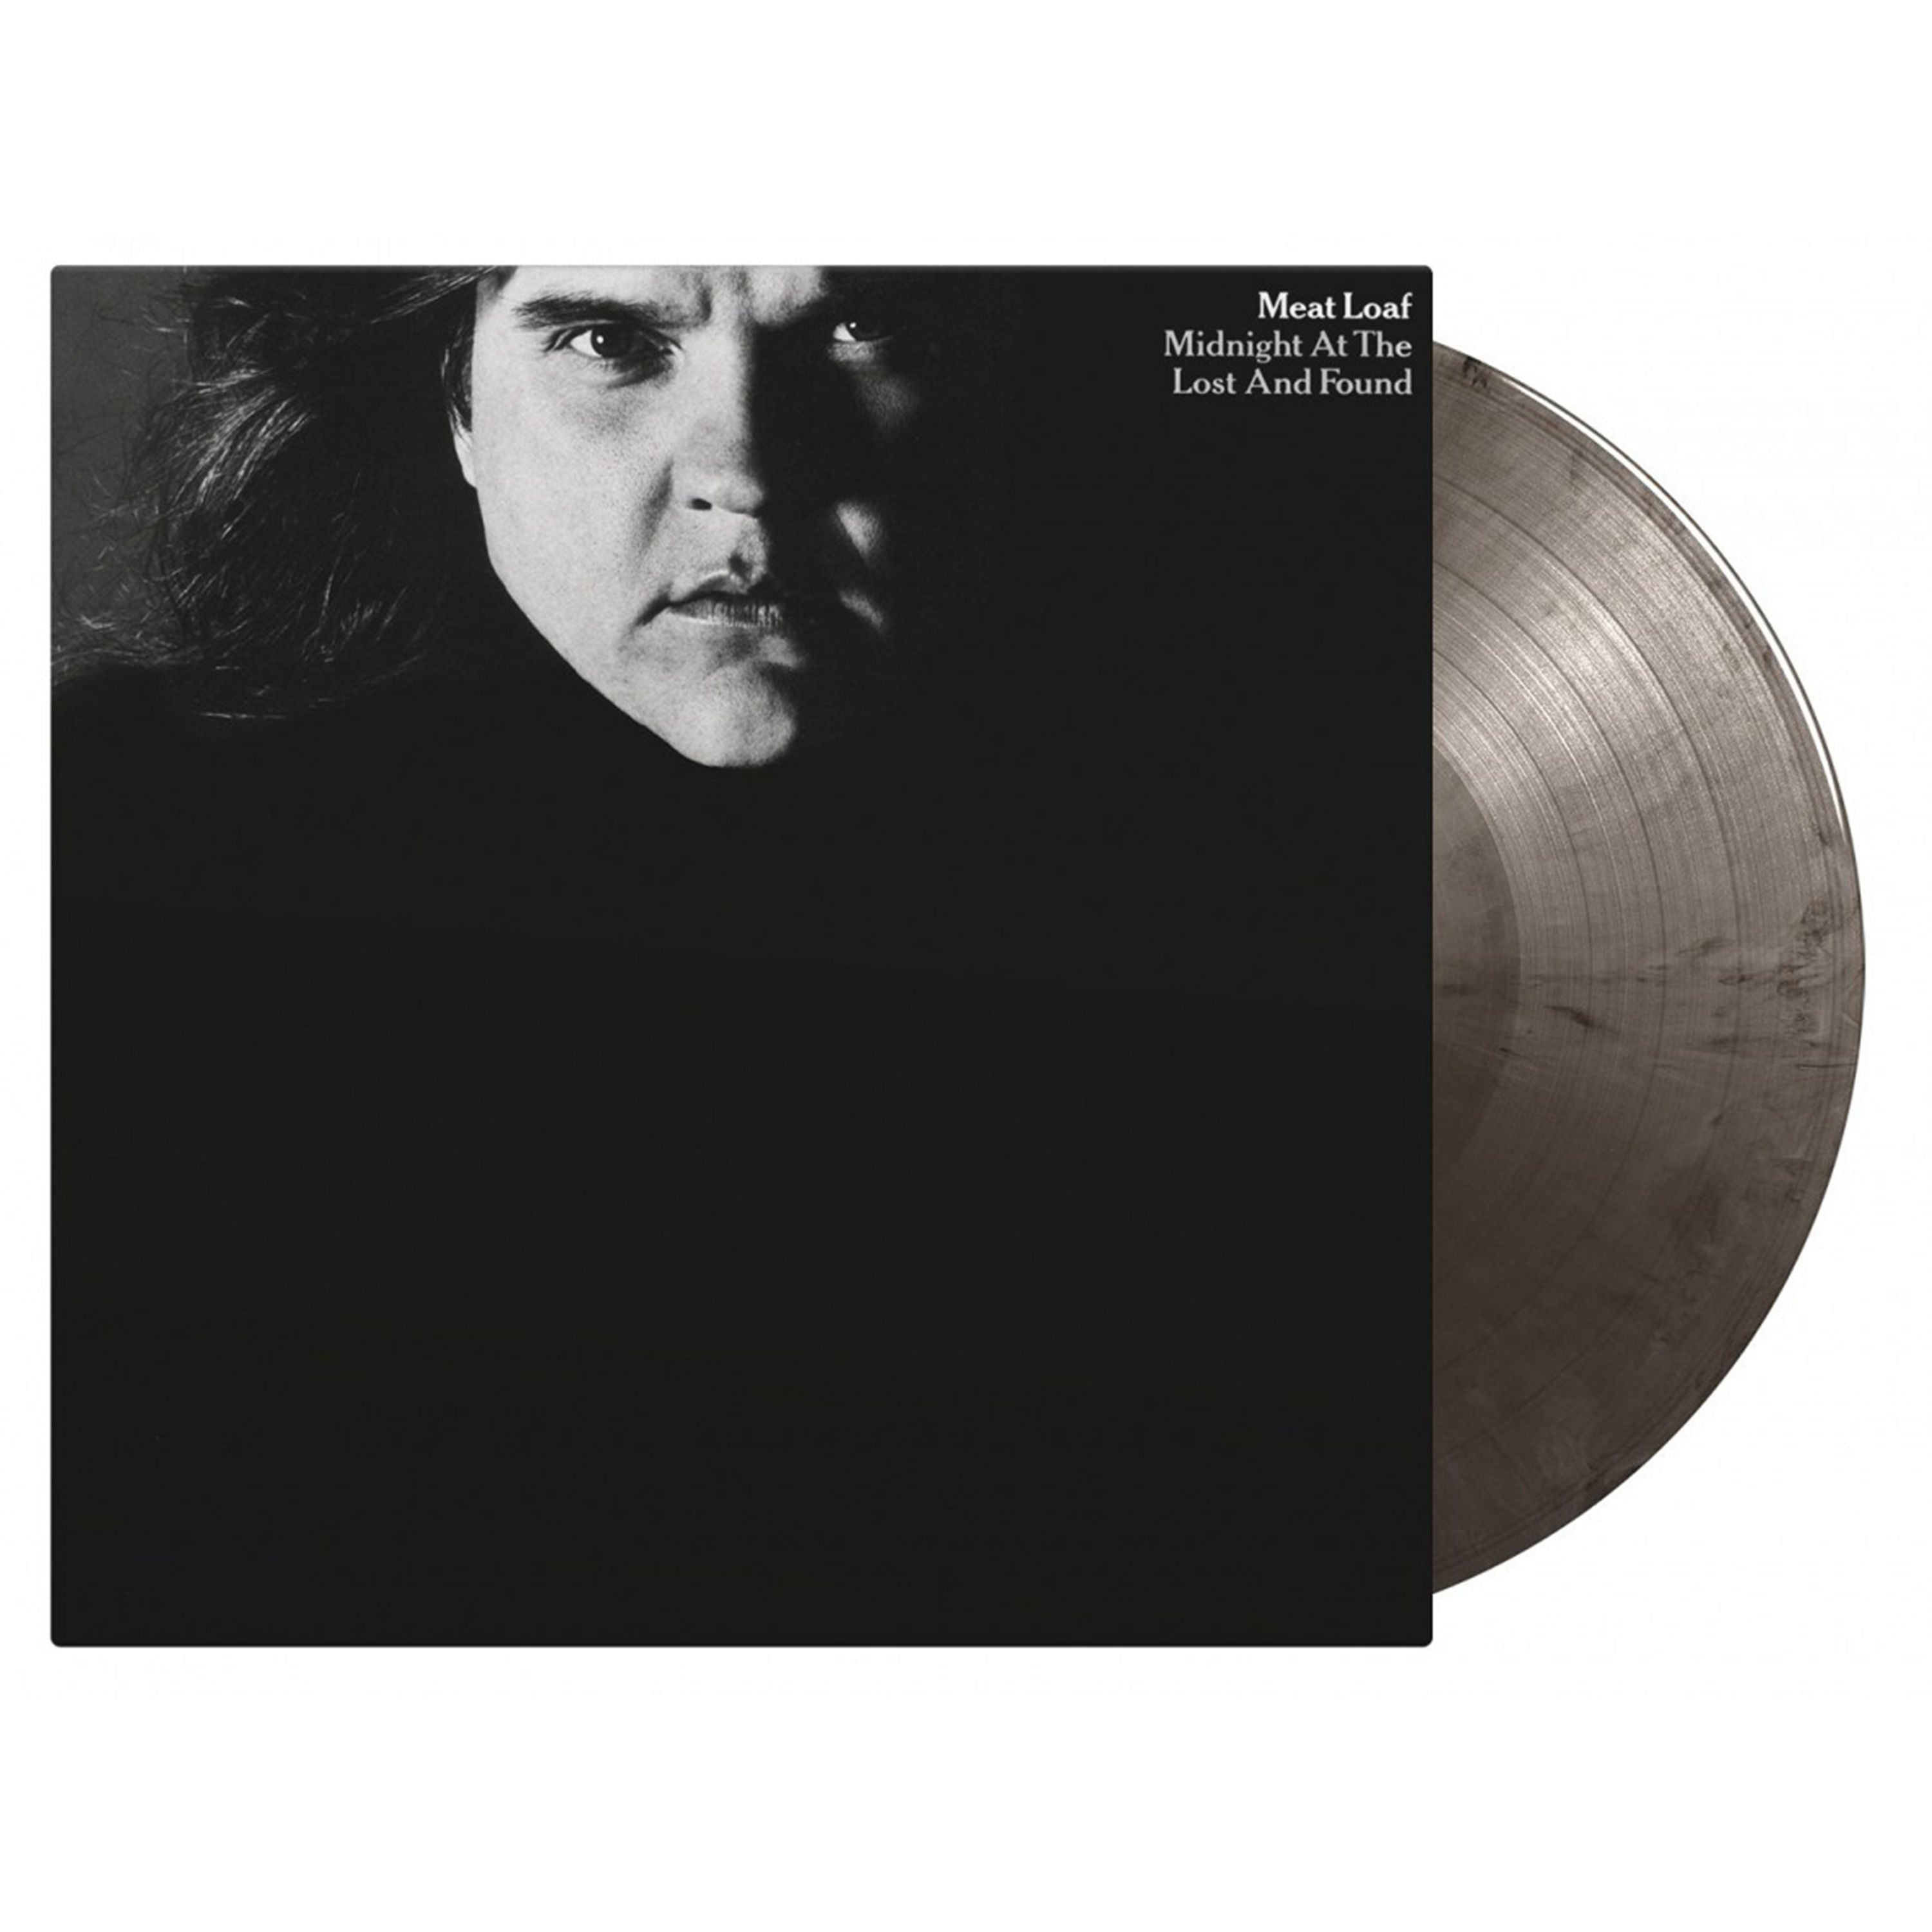 Midnight At The Lost And Found: Limited Edition Silver & Black Marbled Vinyl LP